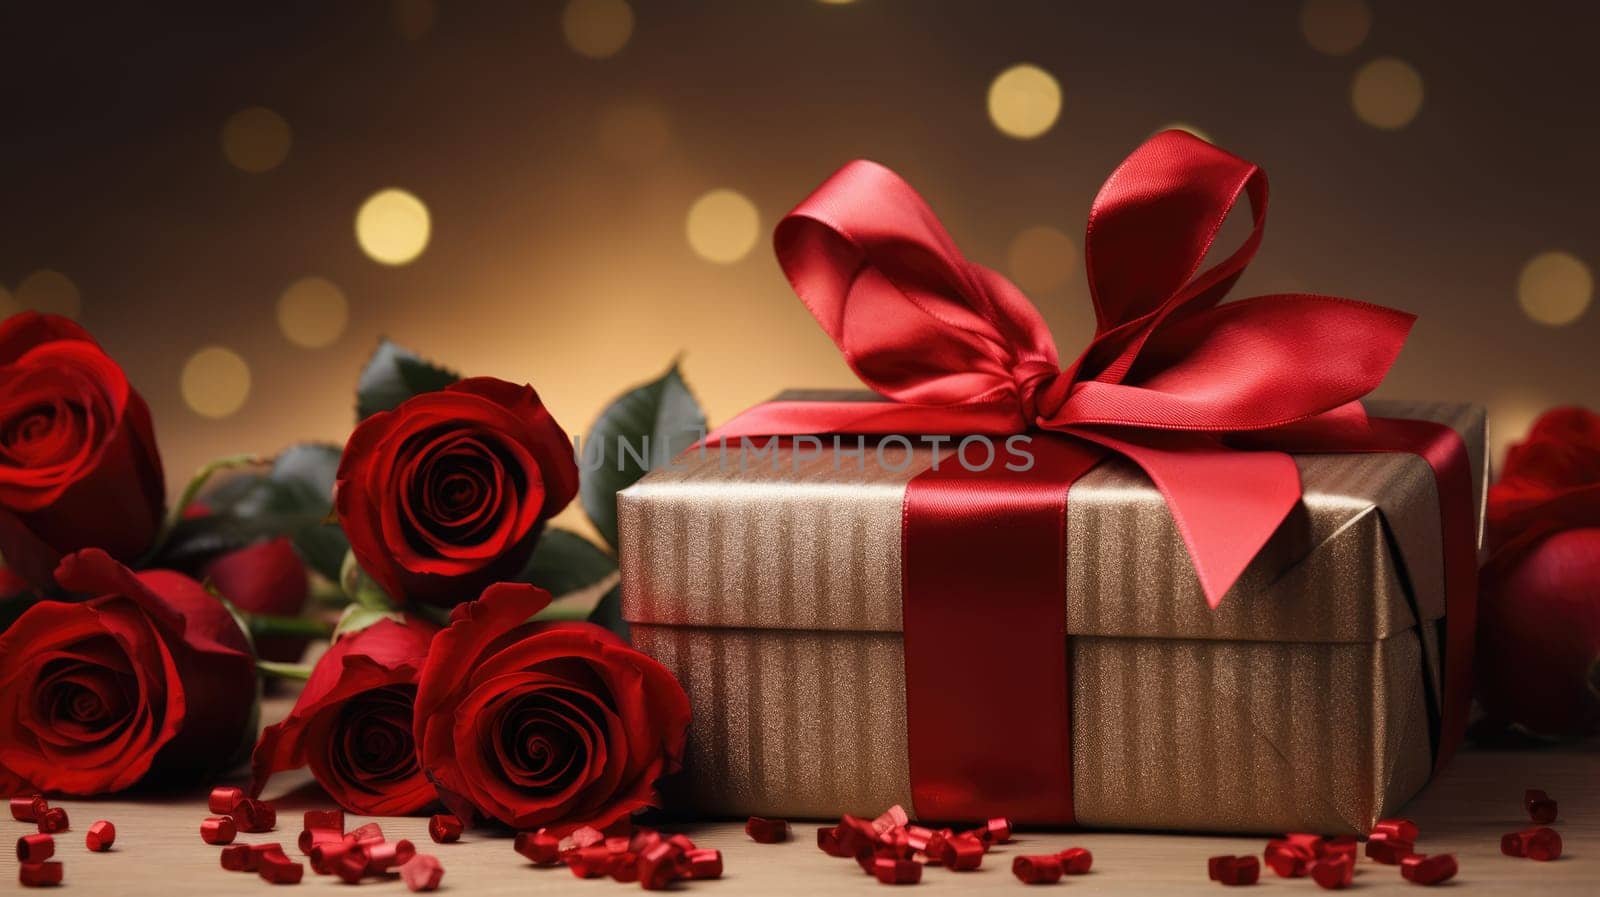 Valentine's day romantic gift, bouquet of red roses on wooden background. Greeting card